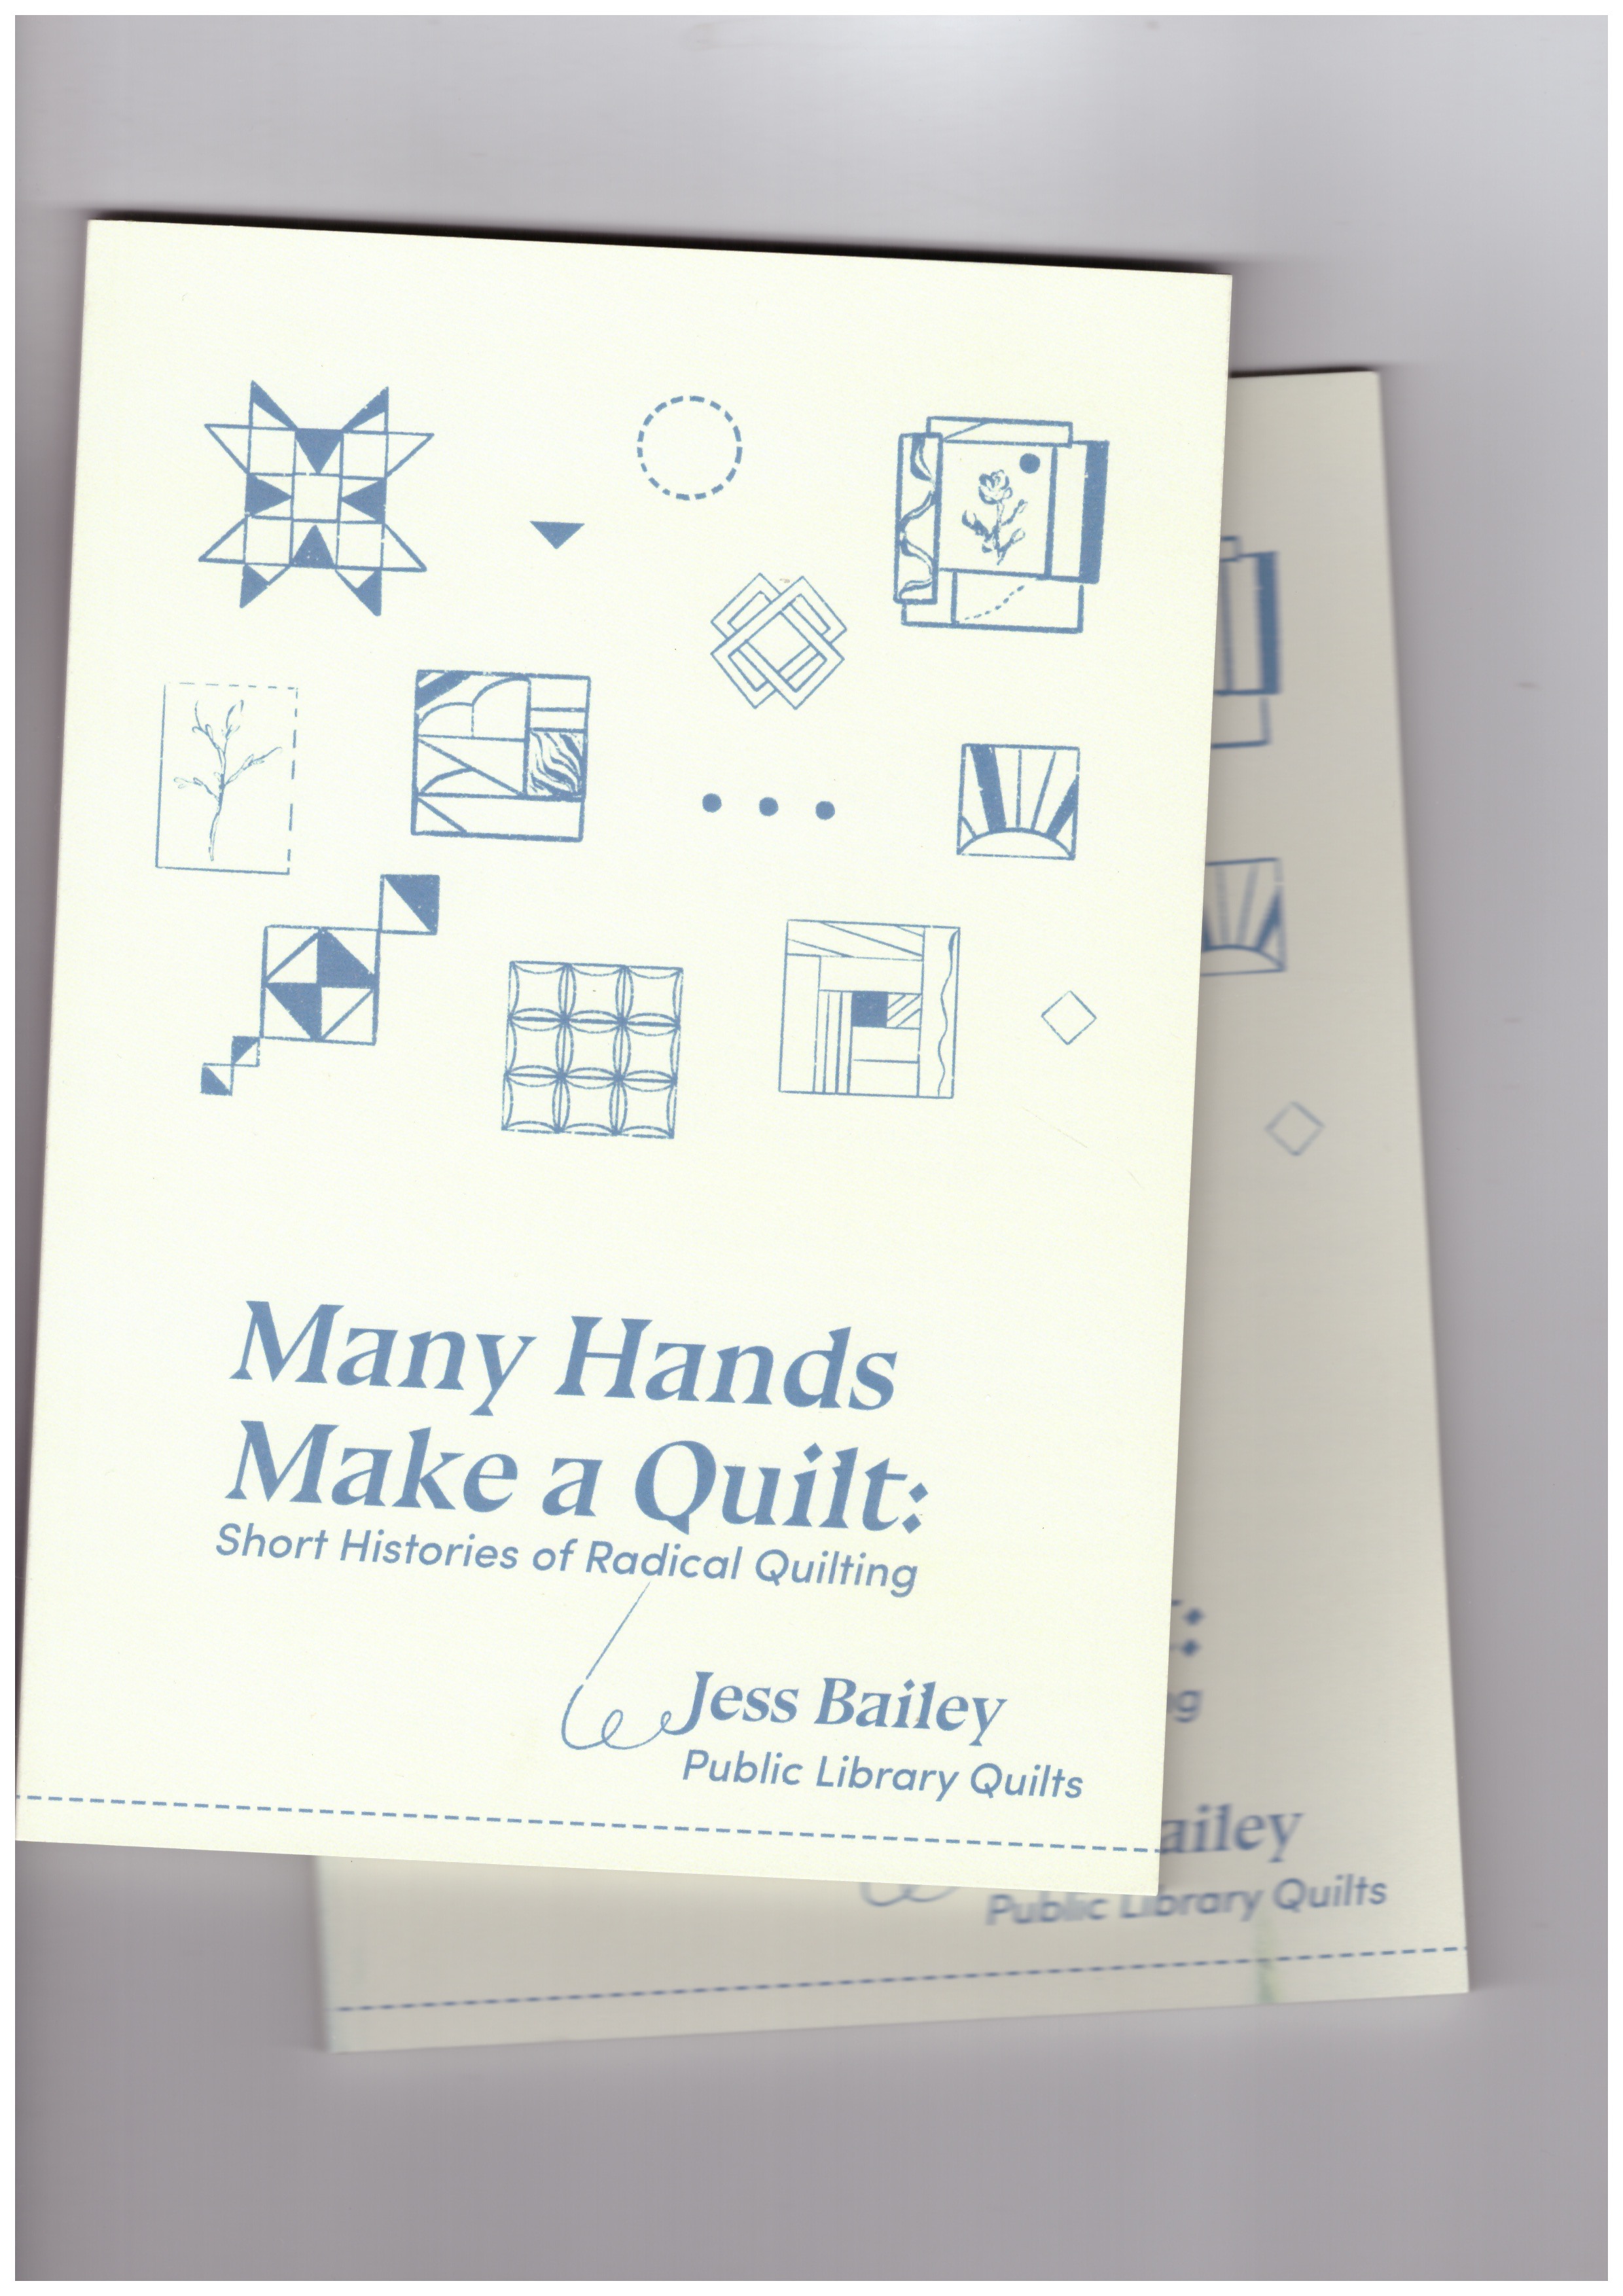 BAILEY, Jess - Many Hands Make a Quilt. Short Histories of Radical Quilting